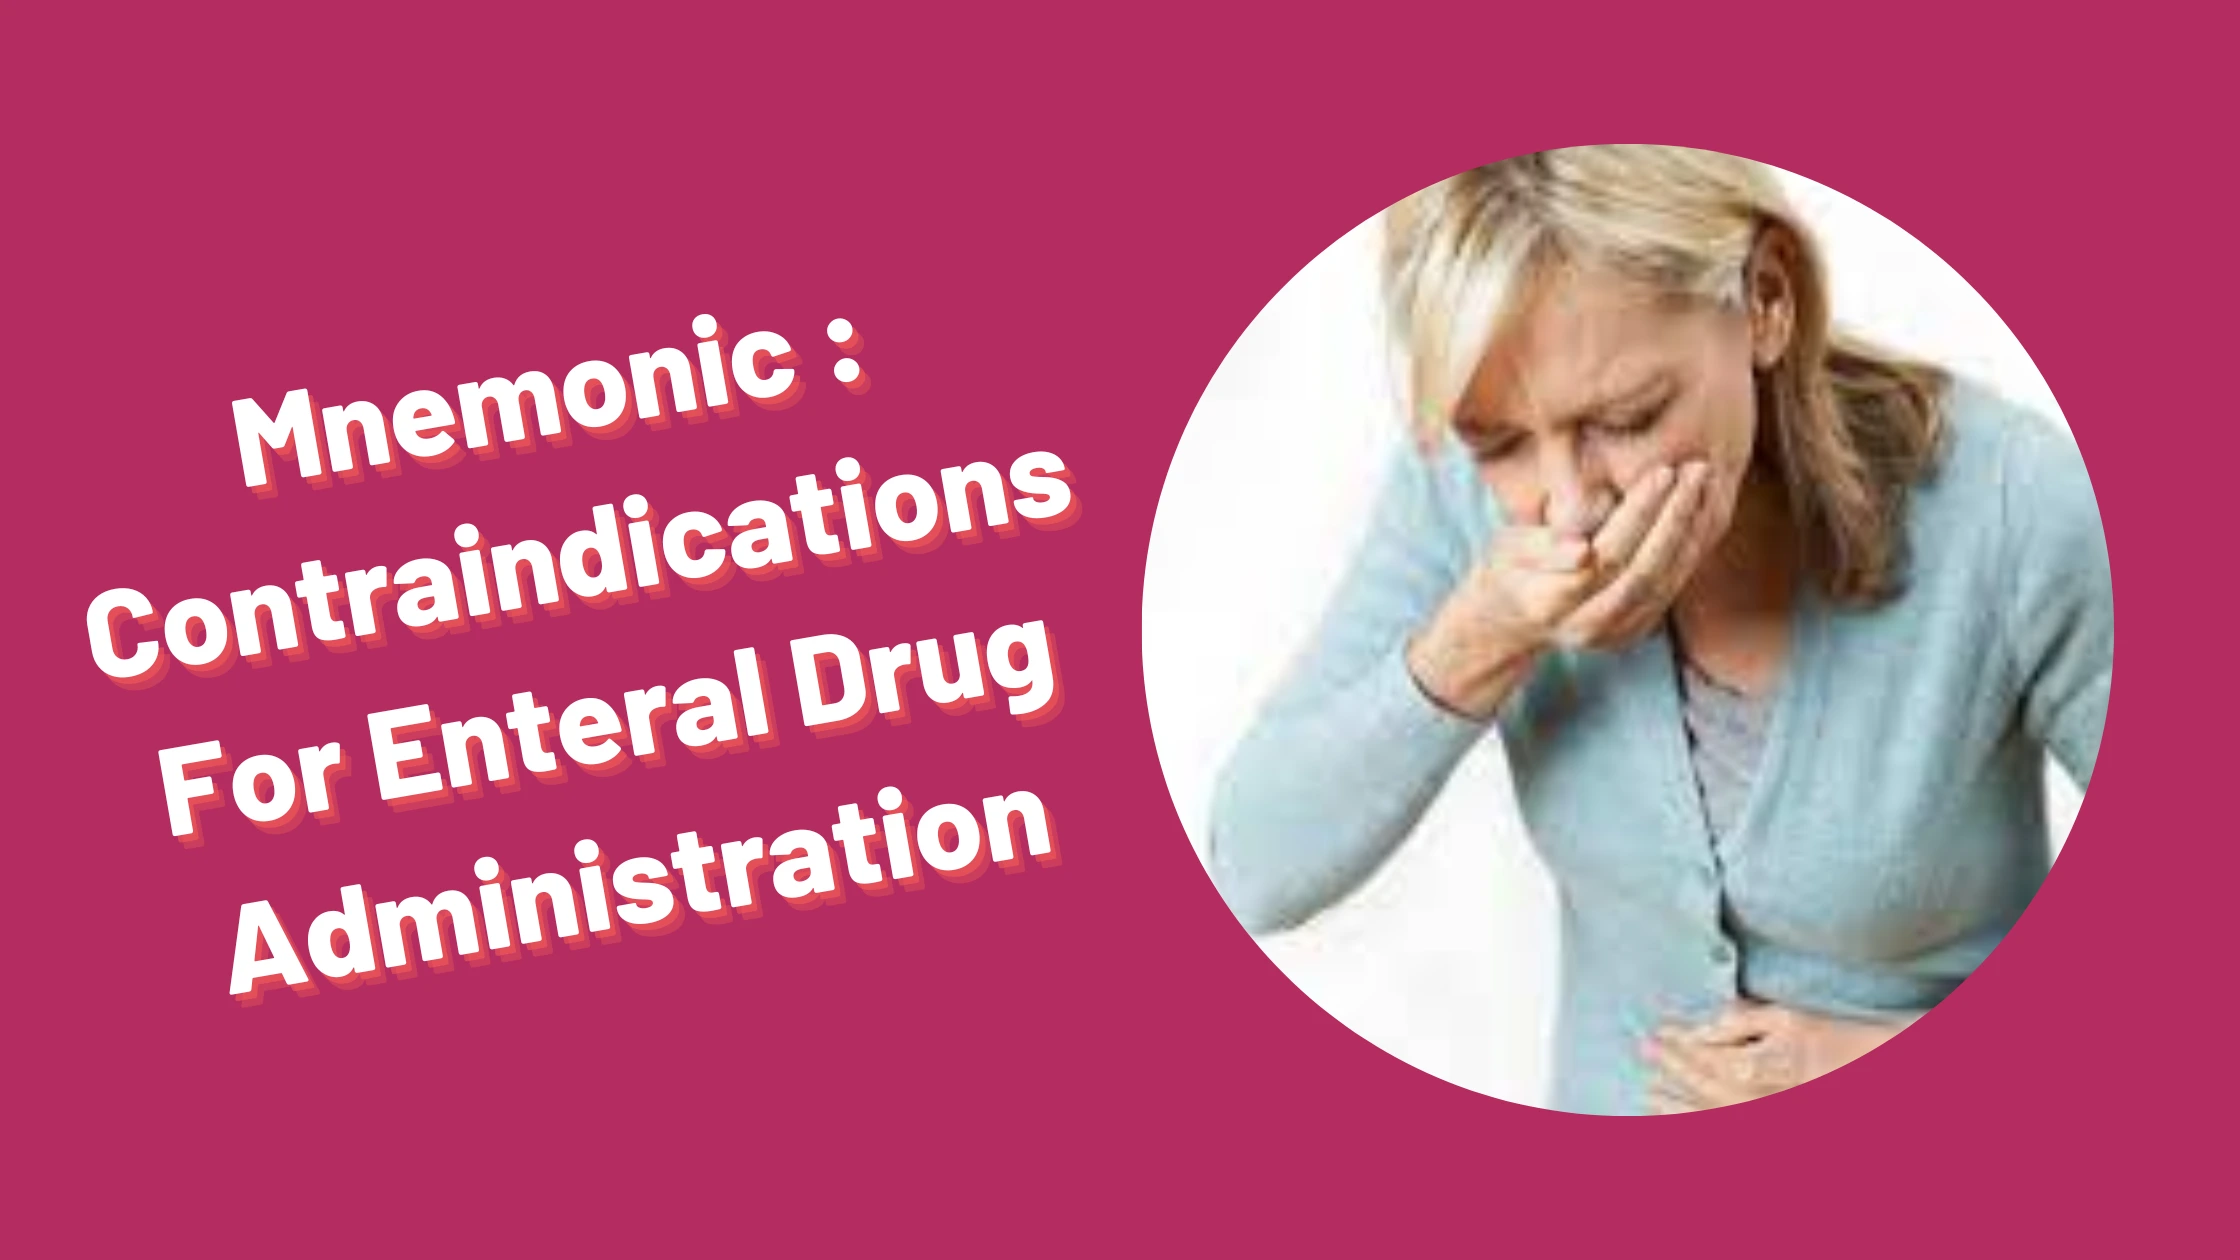 You are currently viewing [Very Cool] Mnemonic : Contraindications For Enteral Drug Administration